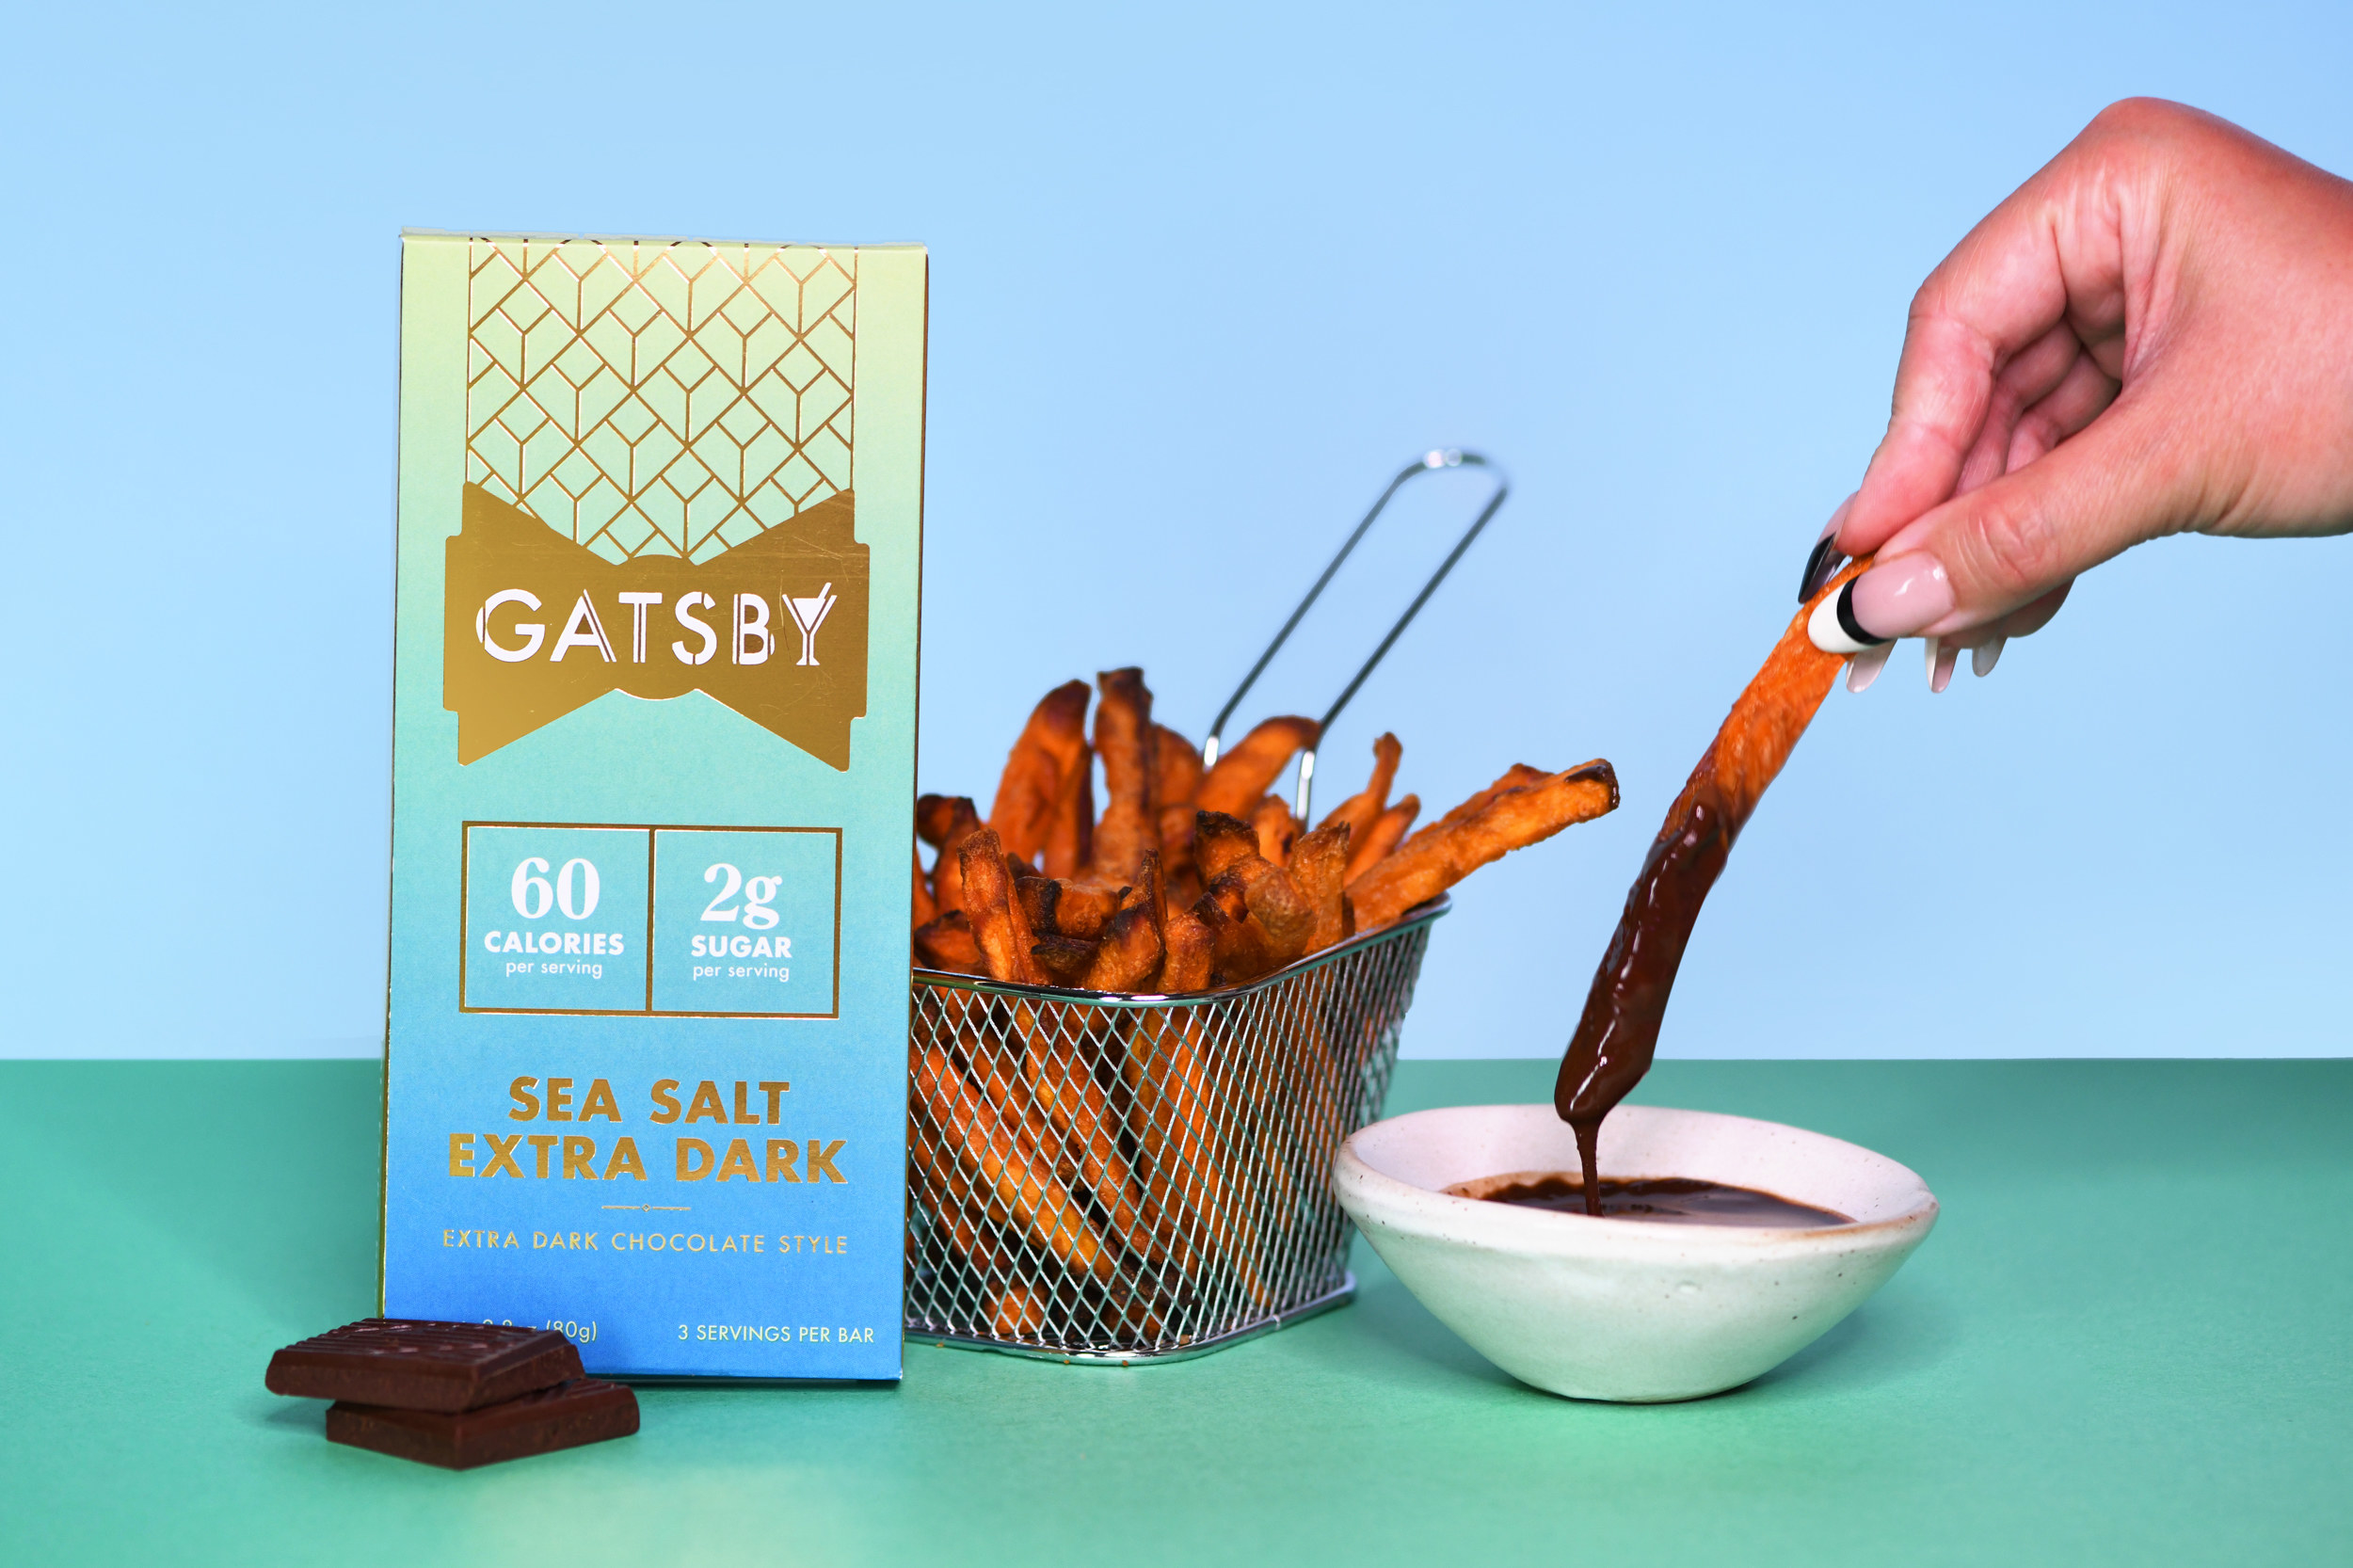 A Gatsby&#x27;s Sea Salt Extra Dark chocolate bar set beside a basket of sweet potato fries and a hand dipping one in a bowl of chocolate